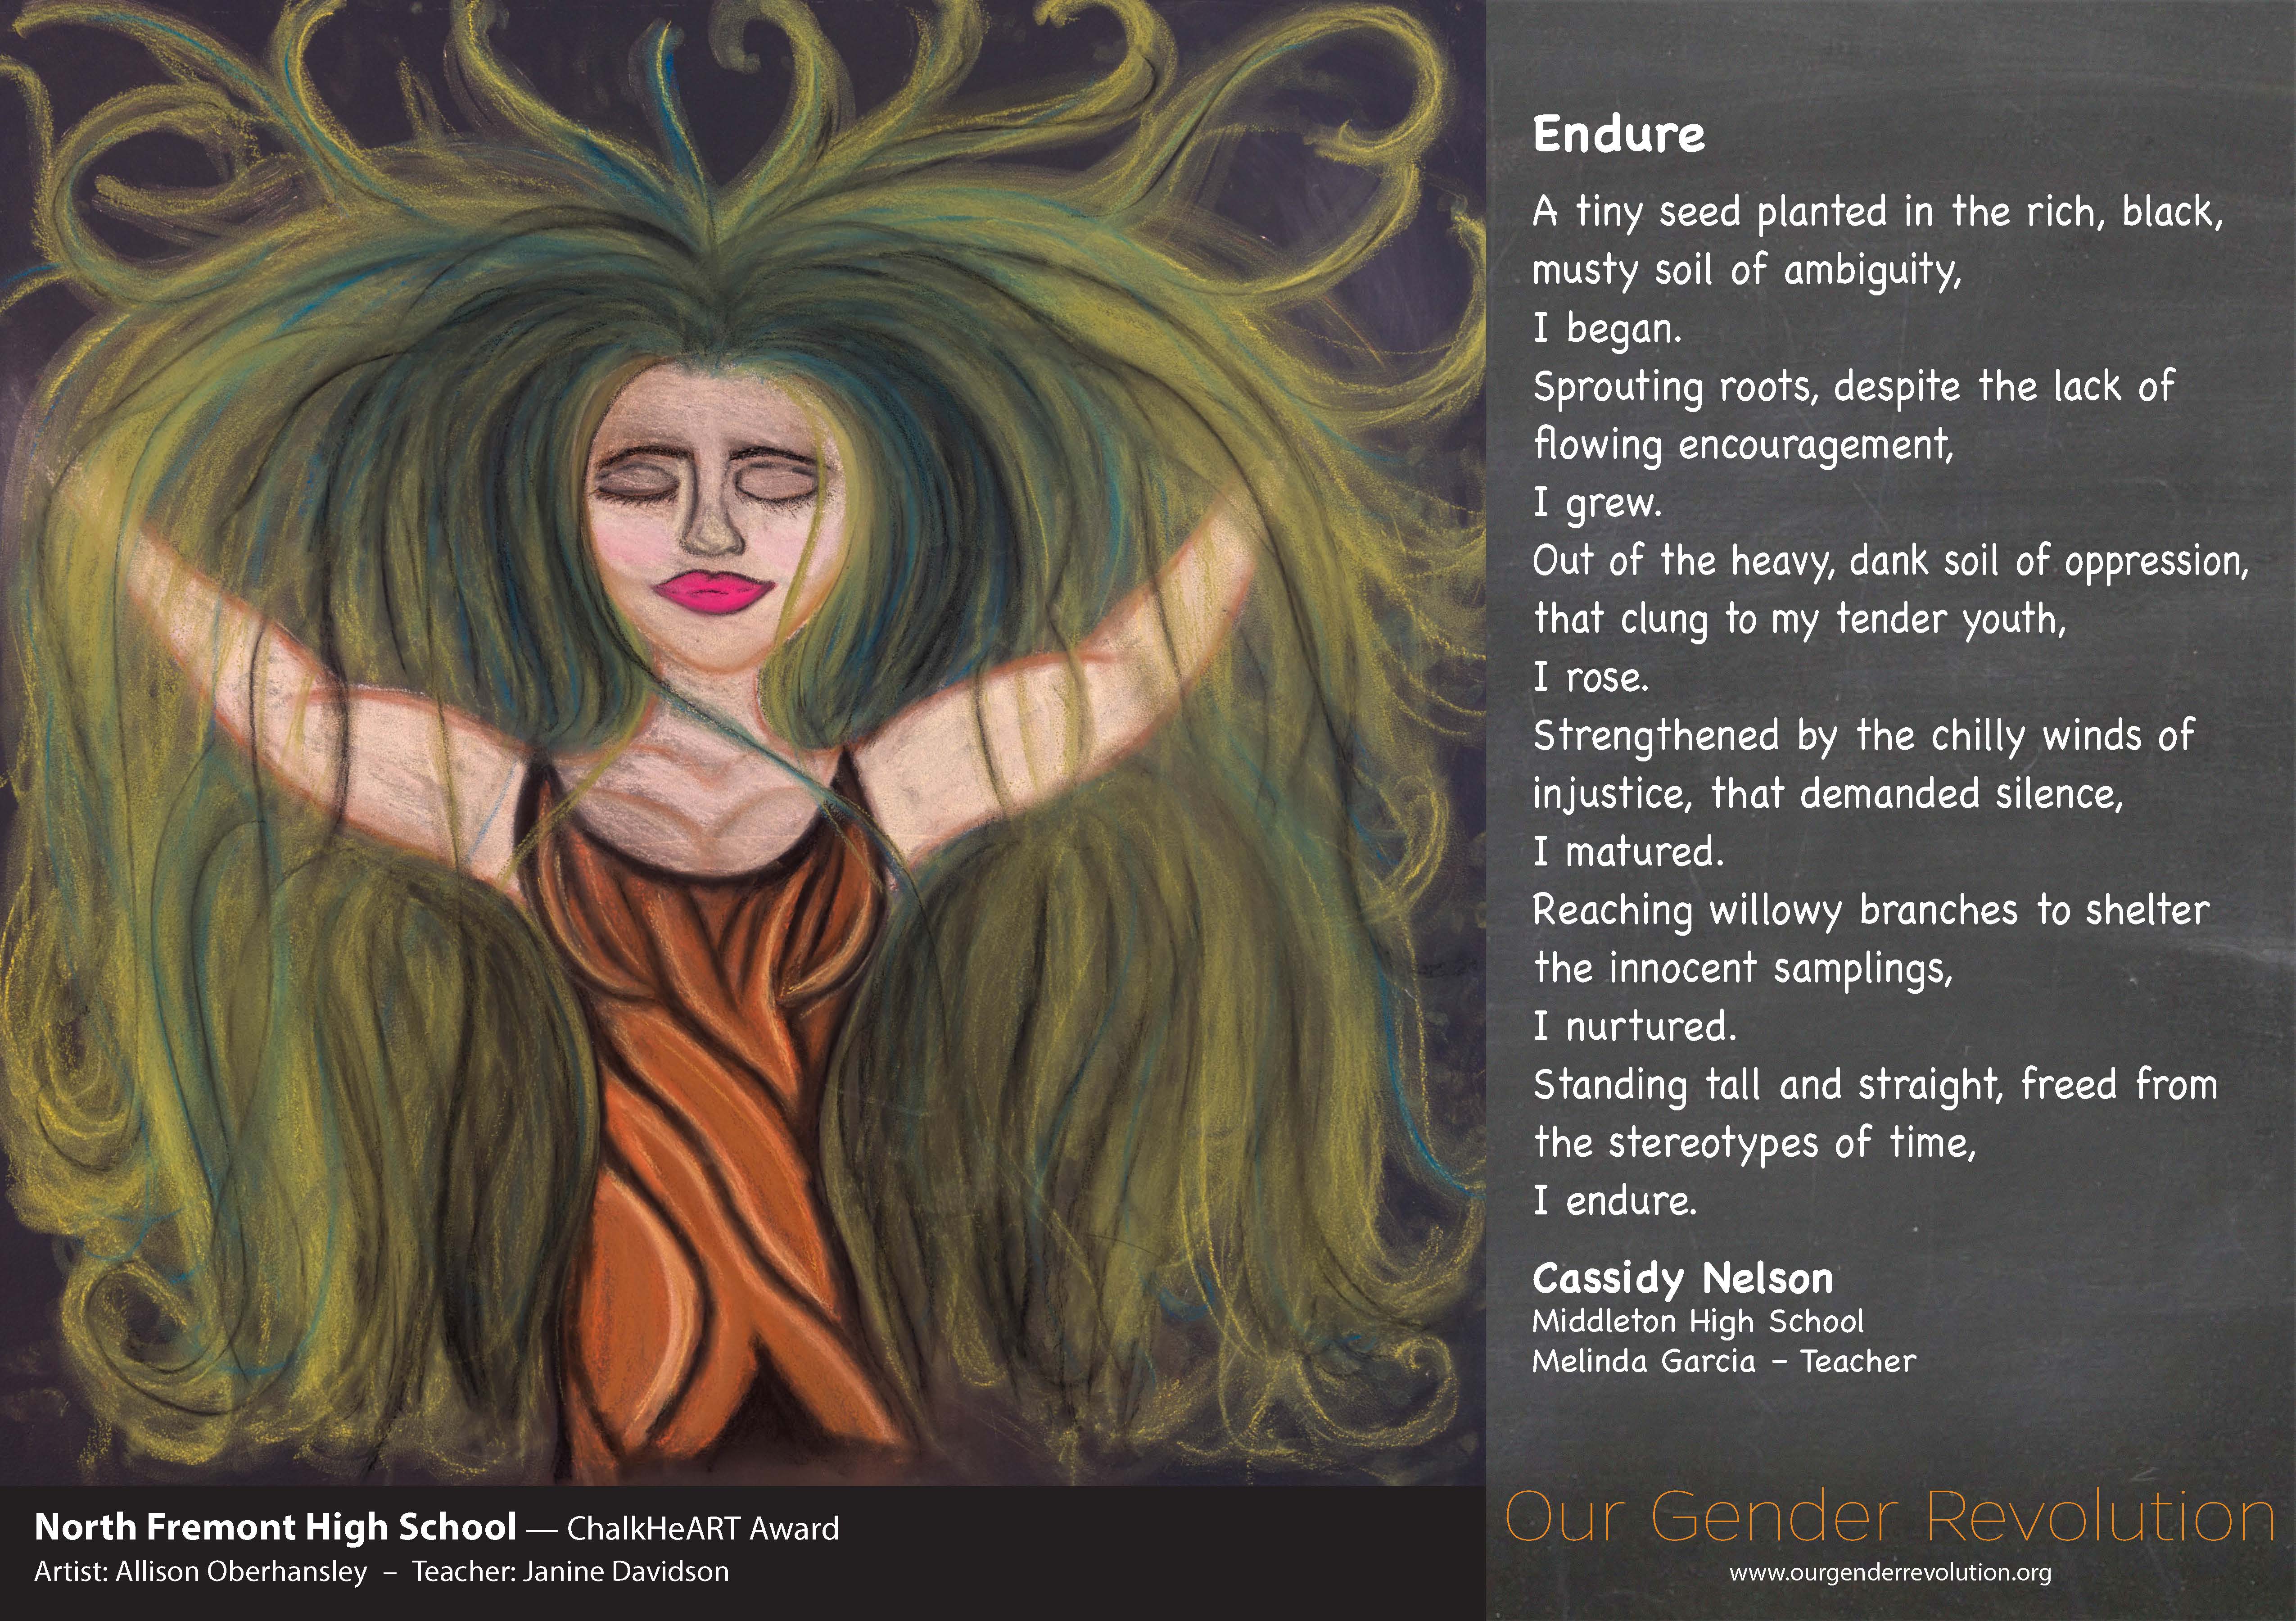 North Fremont High School - Endure by Cassidy Nelson